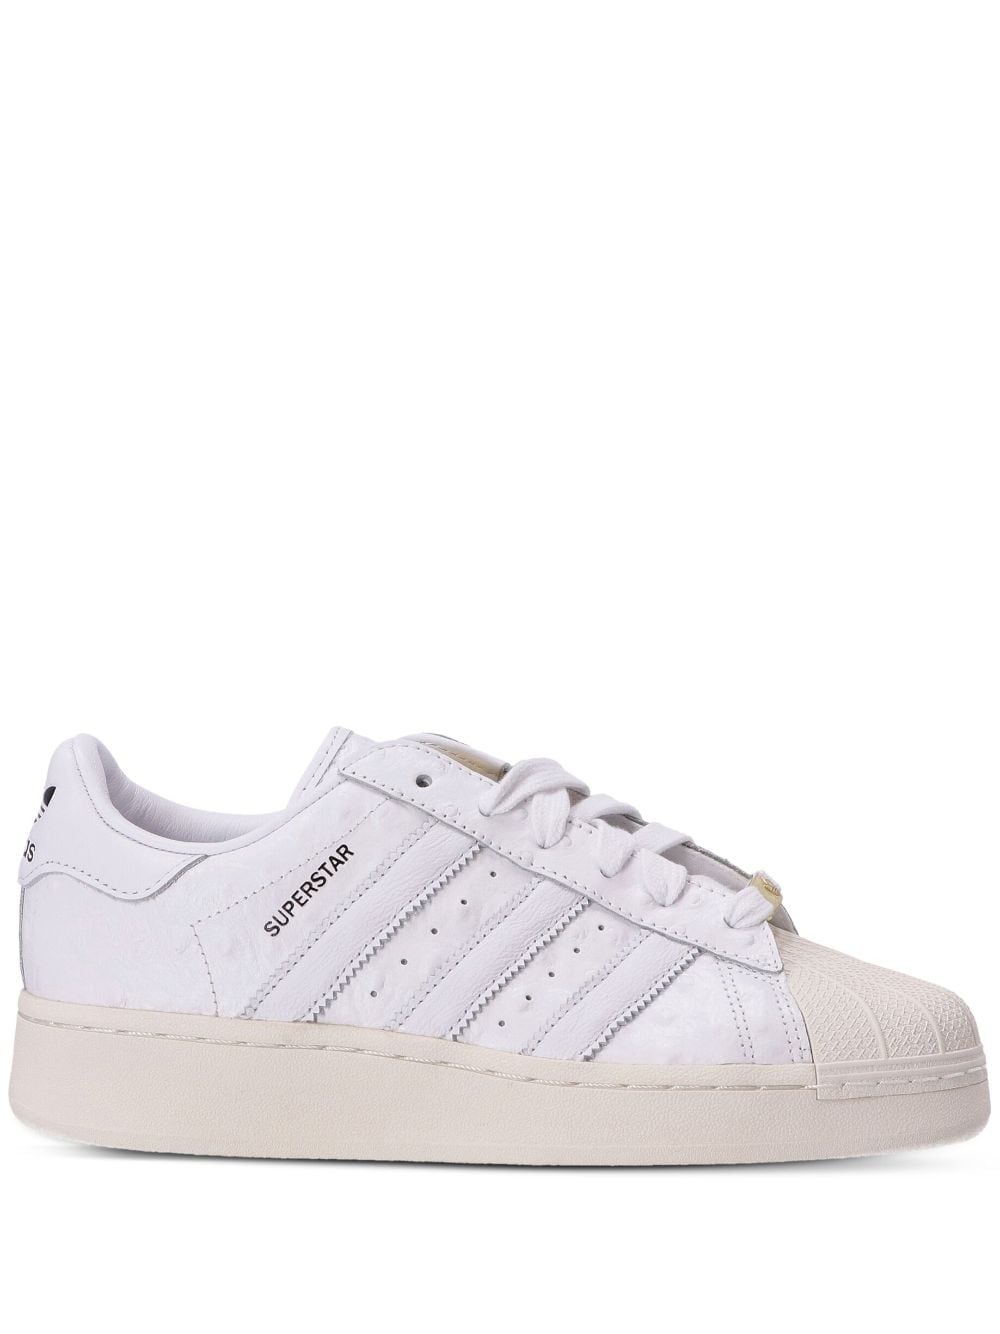 Adidas Originals Superstar Xlg Leather Sneakers In White